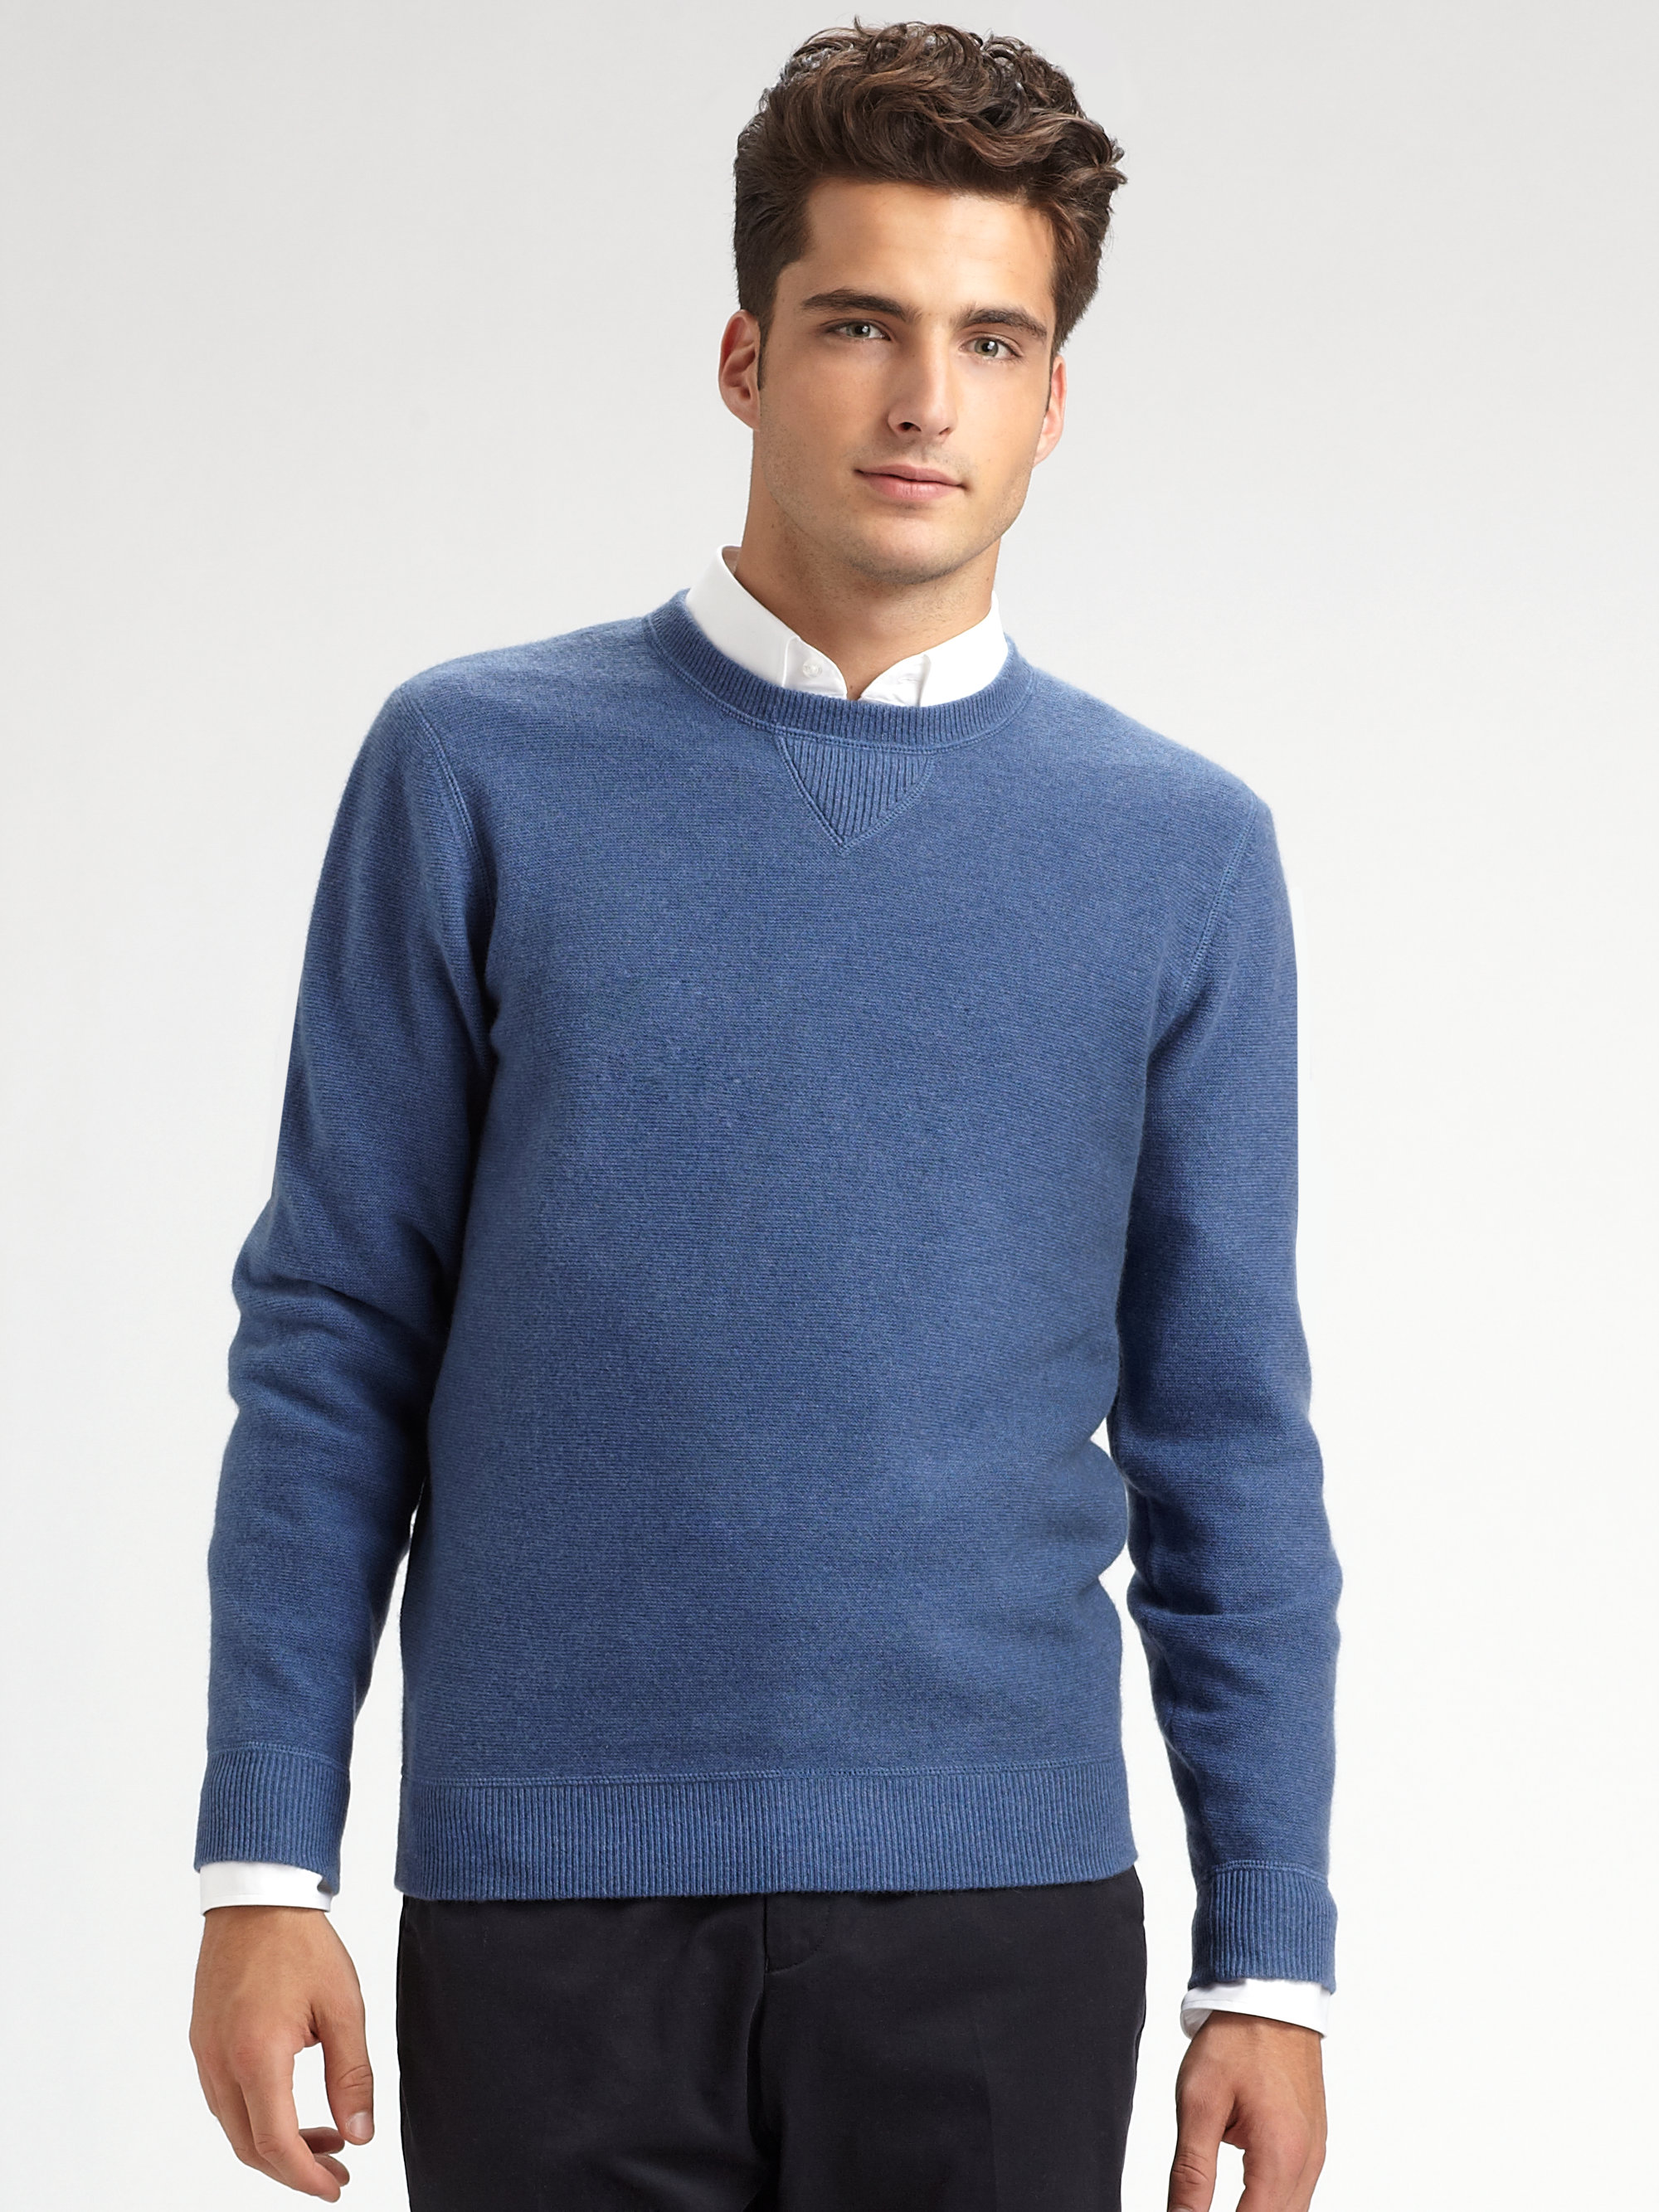 Cableknit Cashmere Sweater Saks Fifth Avenue Men Clothing Sweaters Sweatshirts 